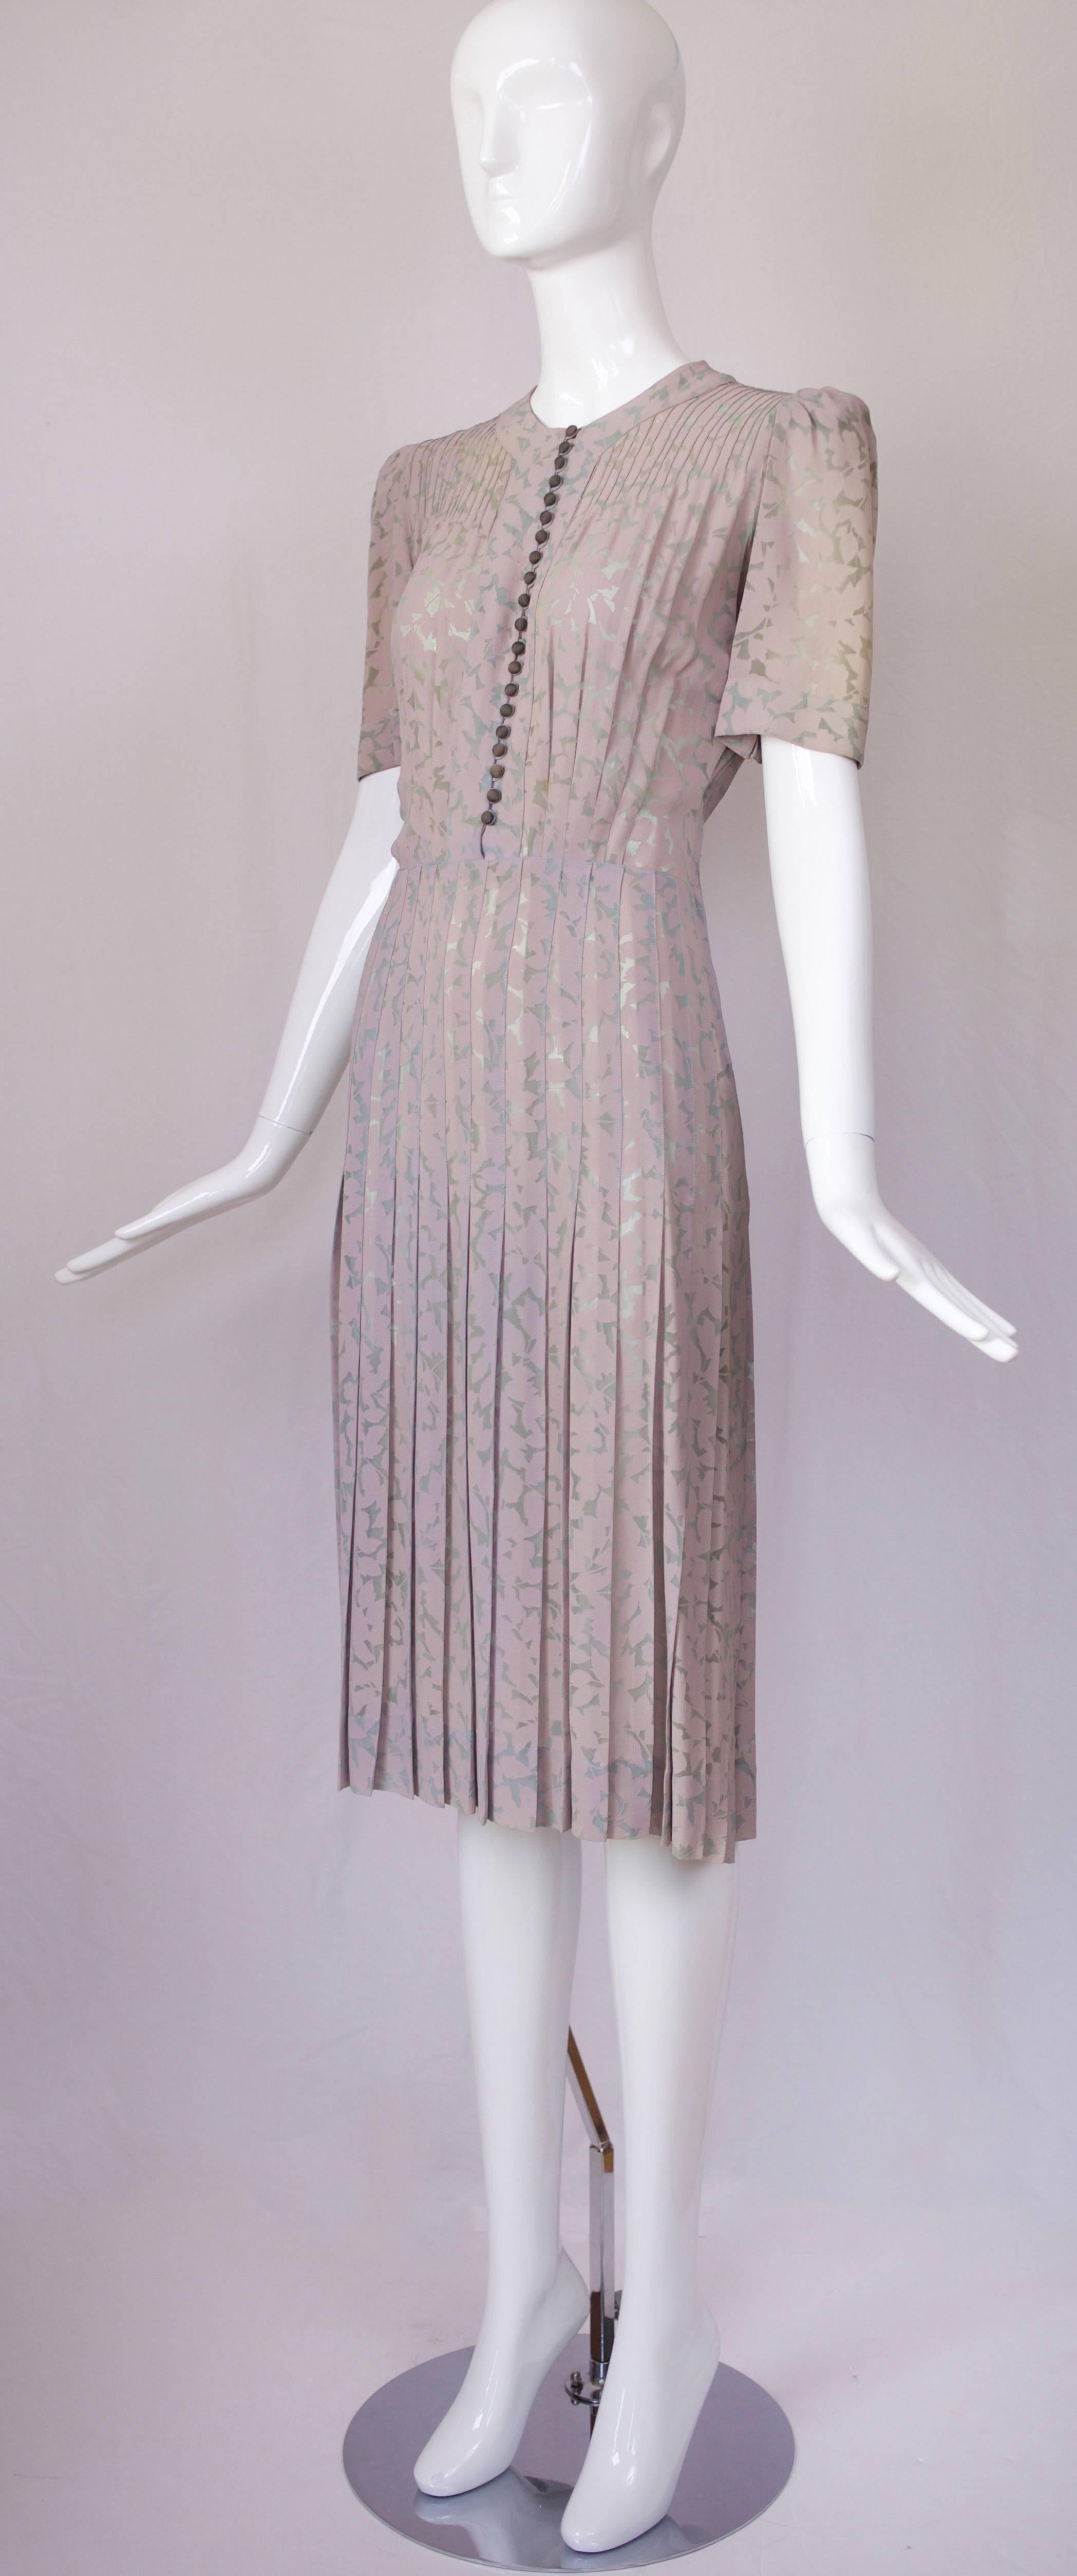 Rare Jeanne Lanvin Adaptation floral print voided crepe day dress circa 1939. The print is in a shadow leaf pattern of pale lavender on green with a pin-tucked bodice top, shoulder with subtle shoulder pads and fabric-covered button closure with